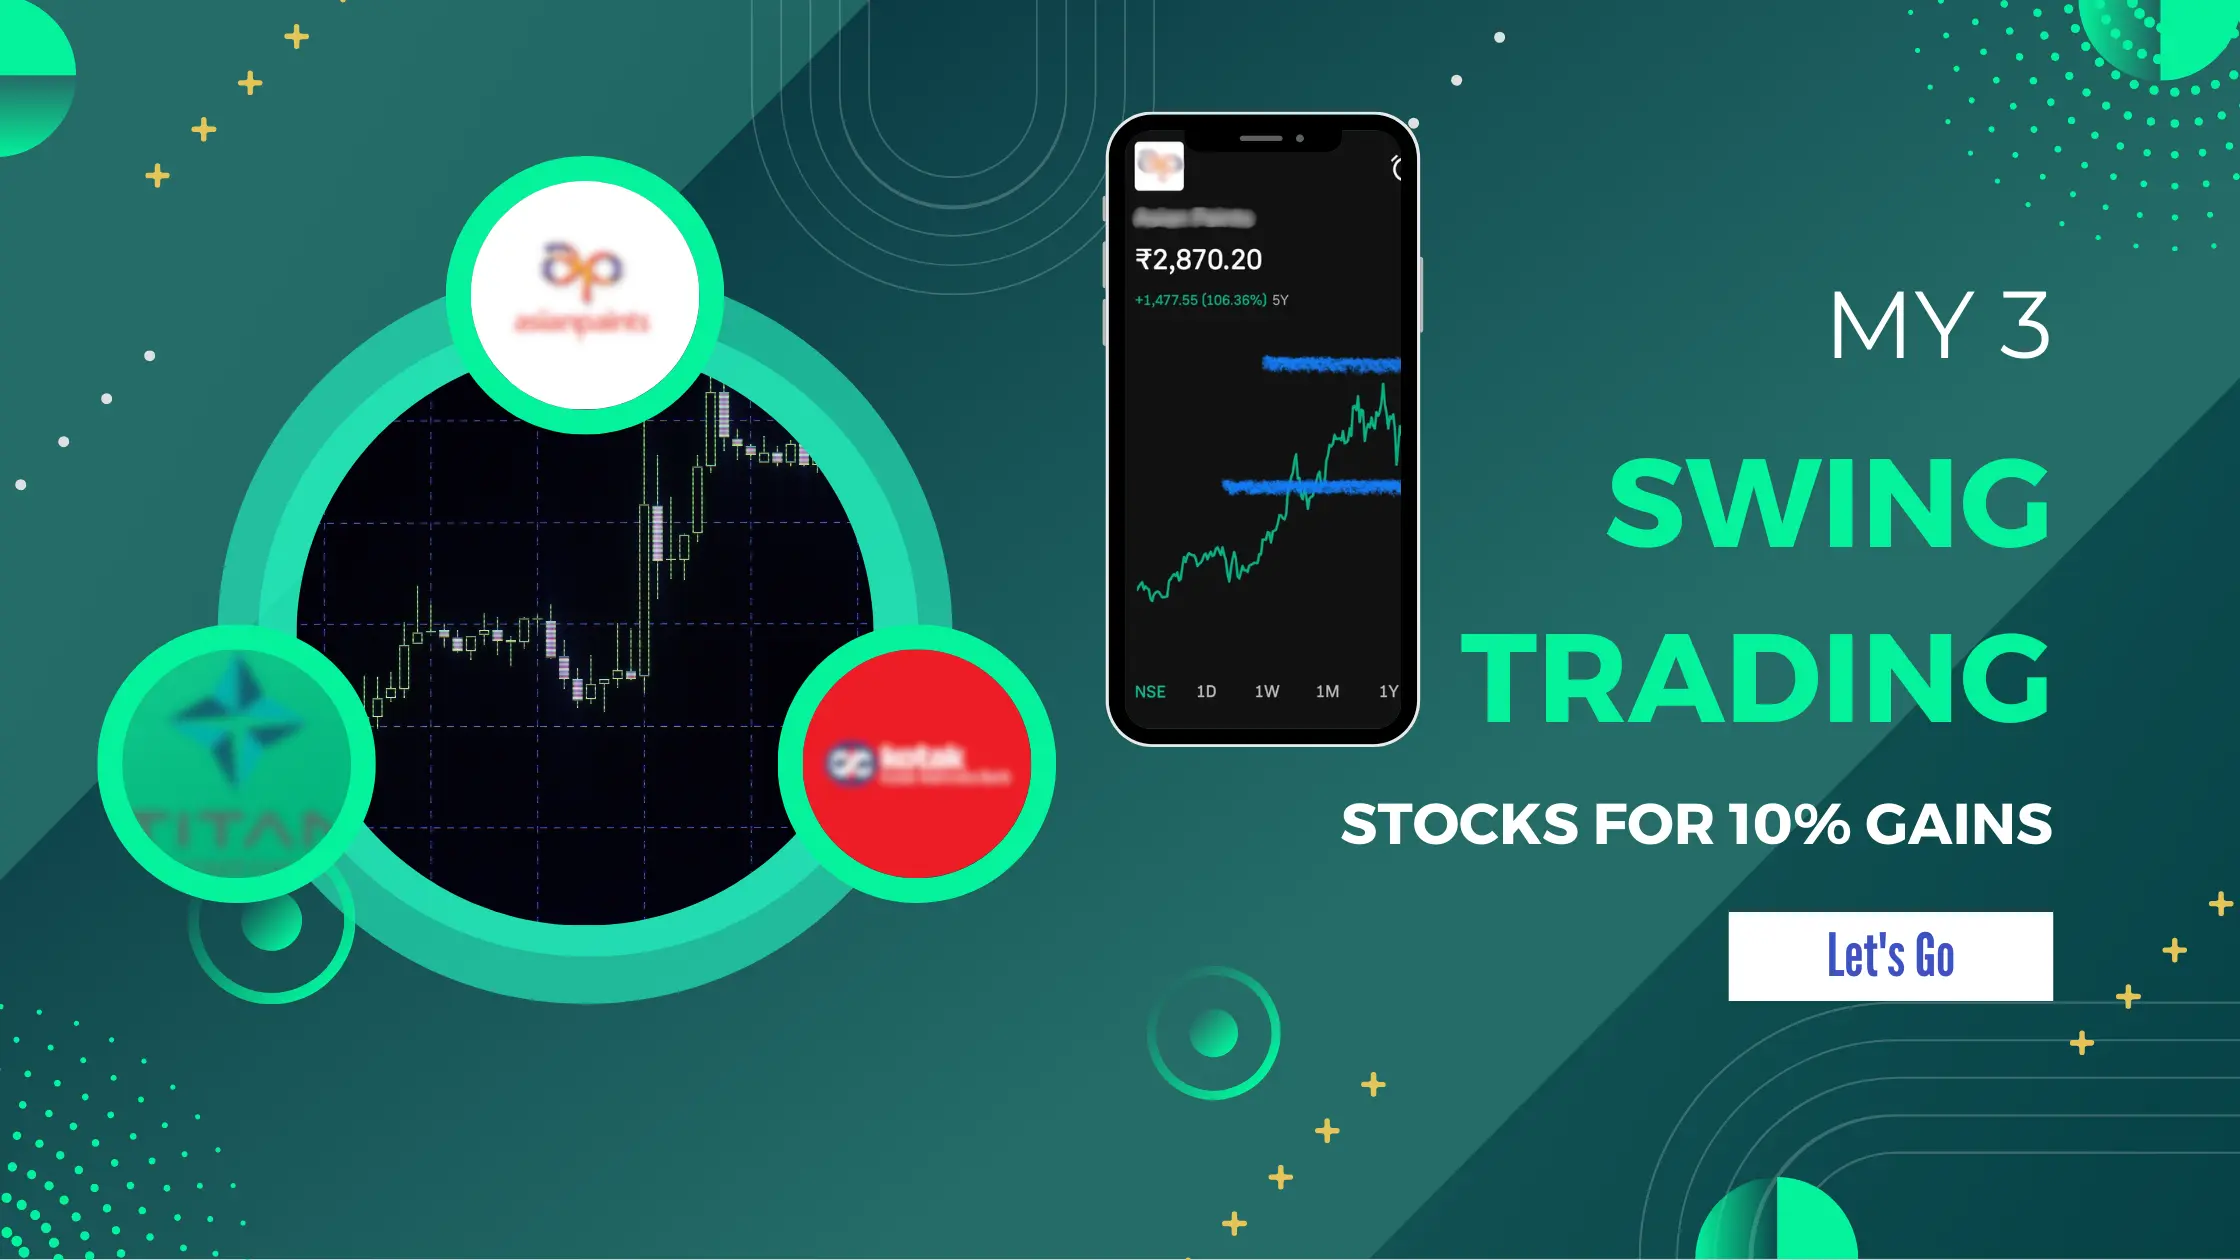 I am Investing In these 3 Swing Trading Stocks for next week. Hope for huge returns